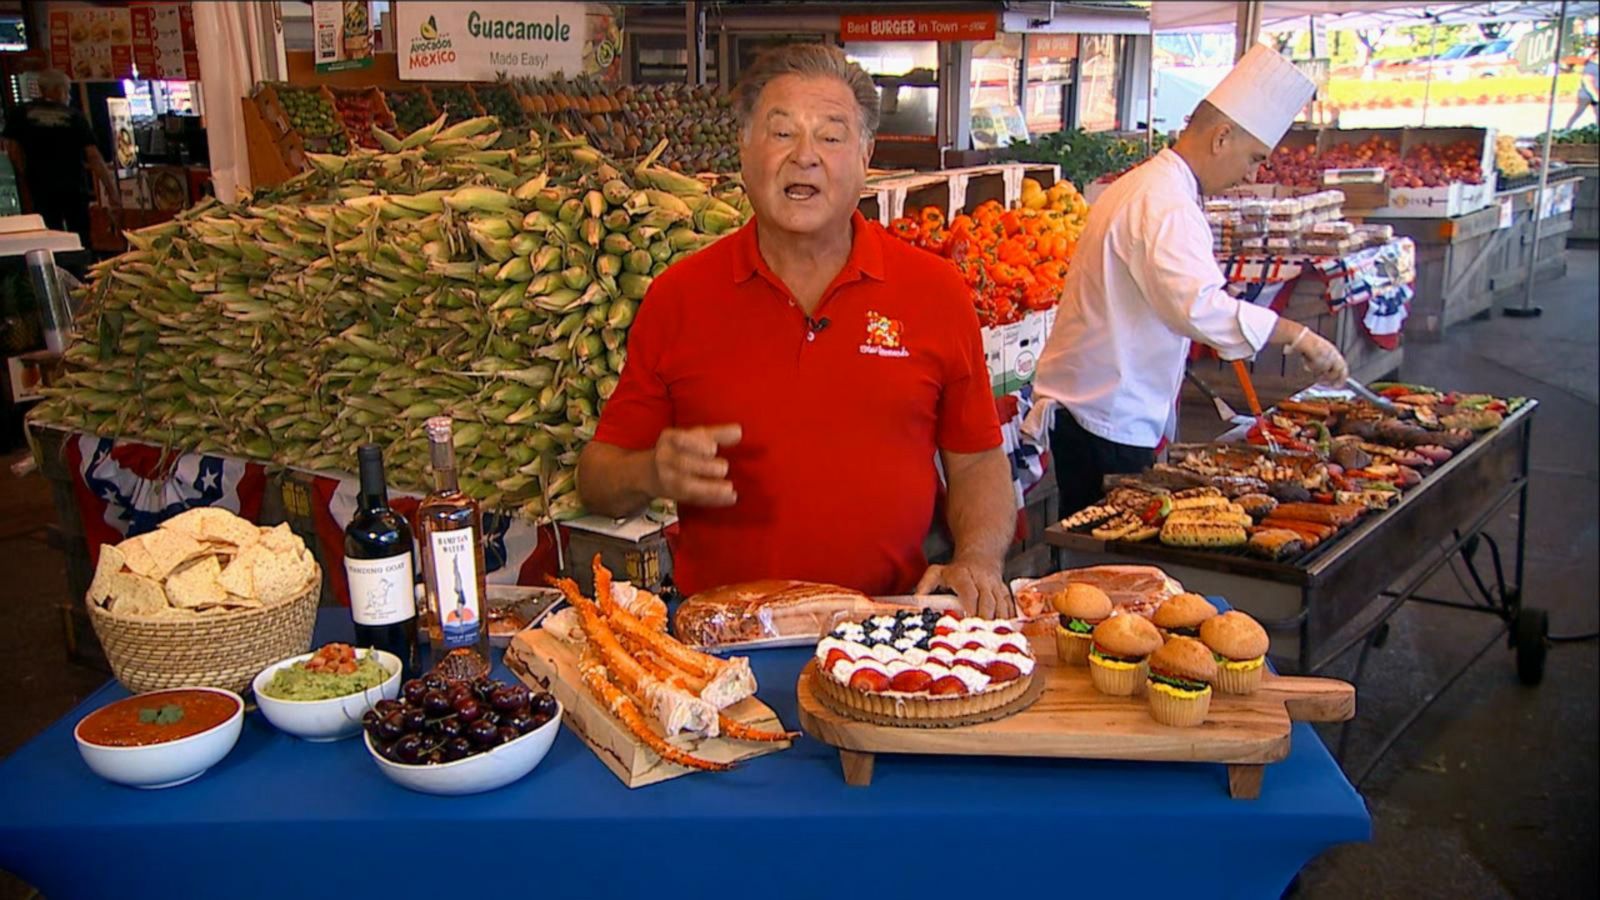 VIDEO: How to save on July 4th grilling essentials amid inflation